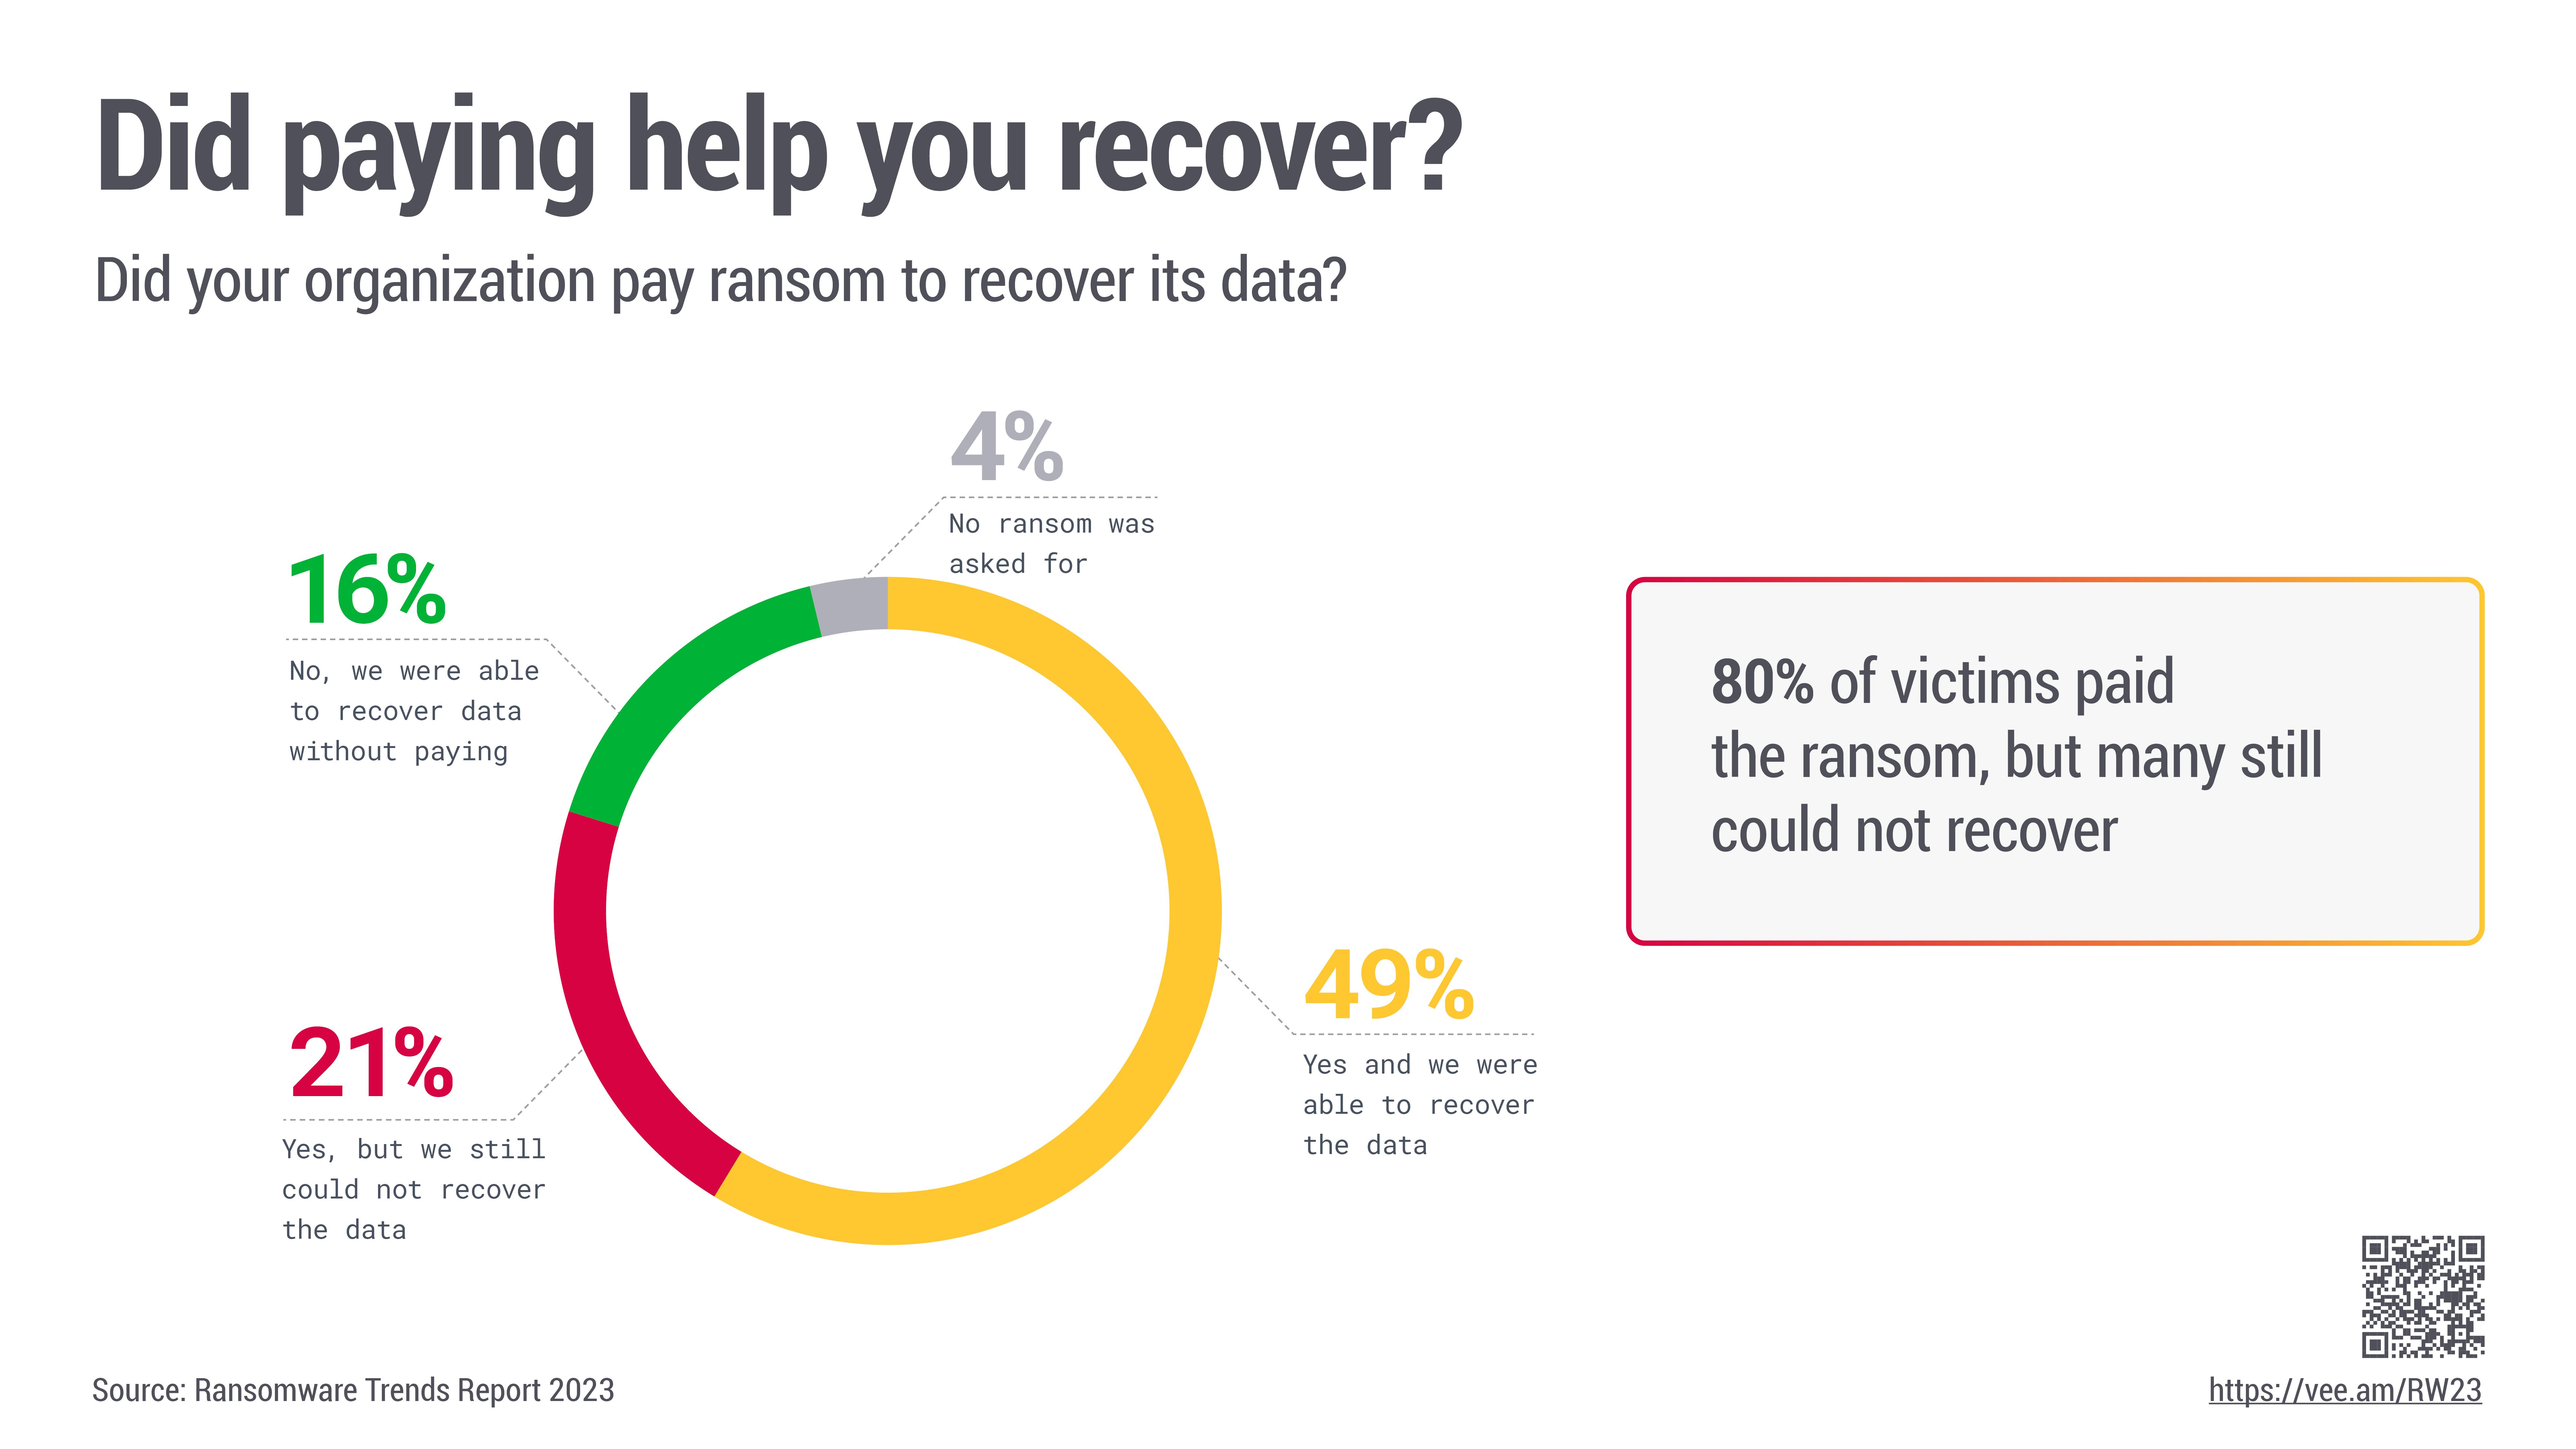 RW23_04_Did_paying_help_you_recover